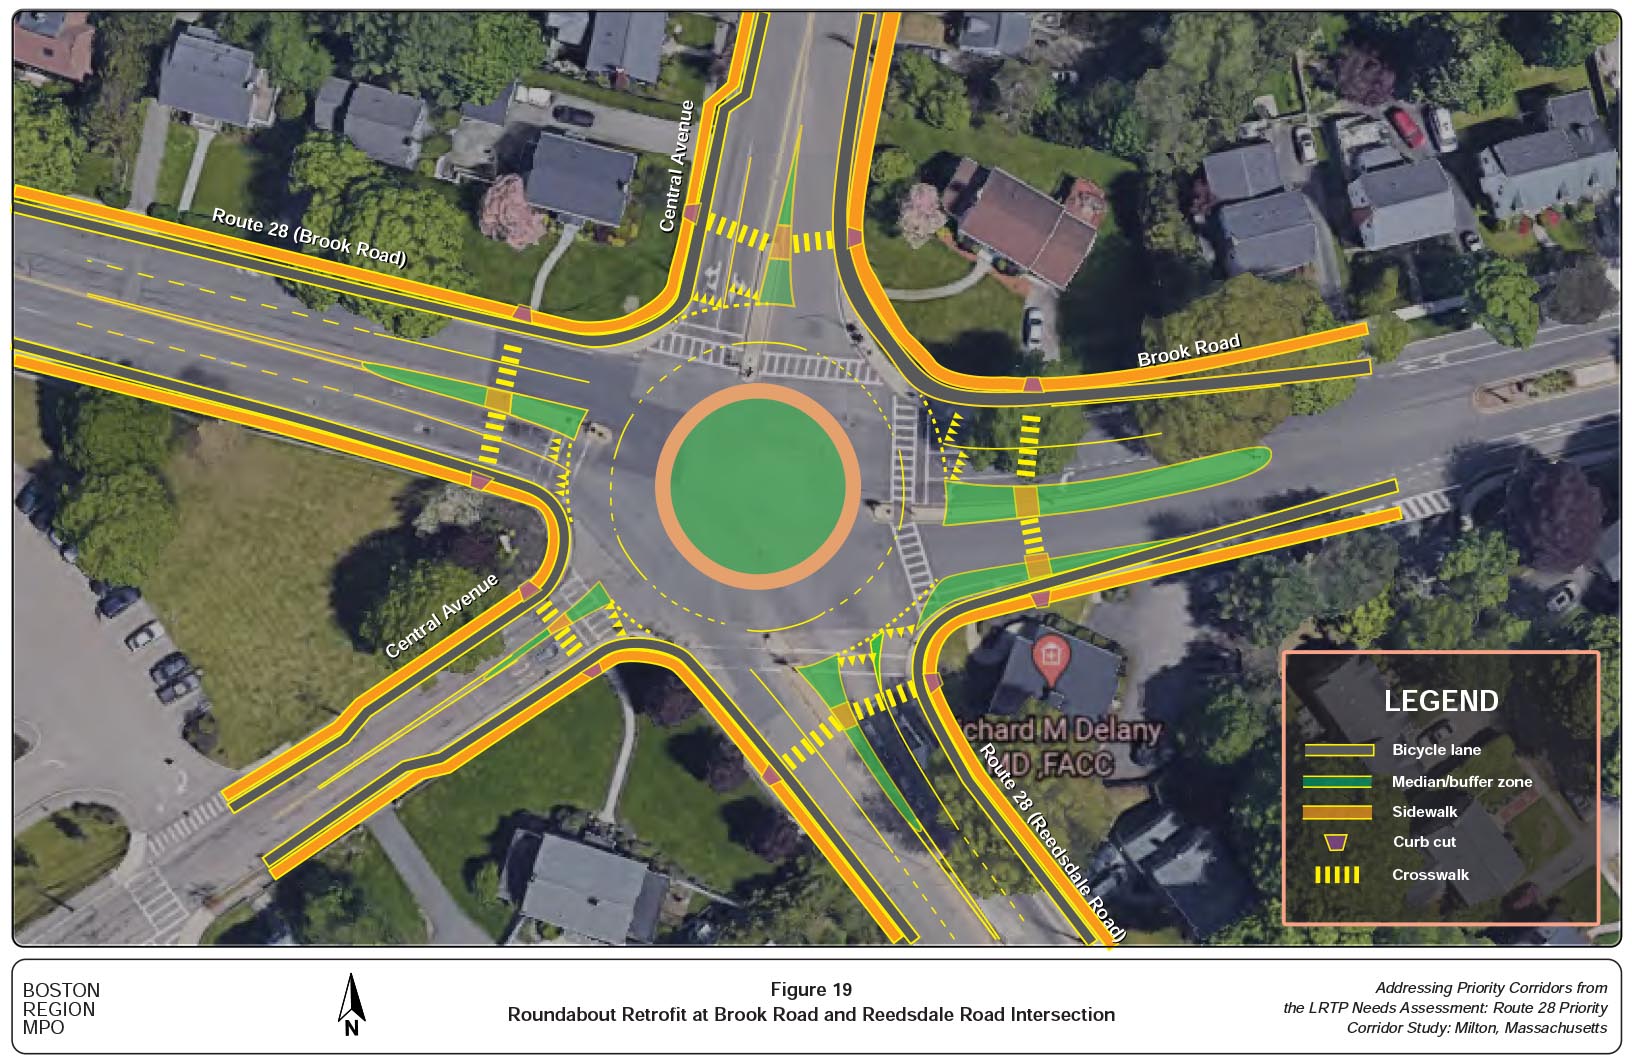 Figure 19
Roundabout Retrofit at Brook Road and Reedsdale Road Intersection 
Figure 19 shows the layout of the Roundabout Retrofit at Brook Road and Reedsdale Road Intersection.
